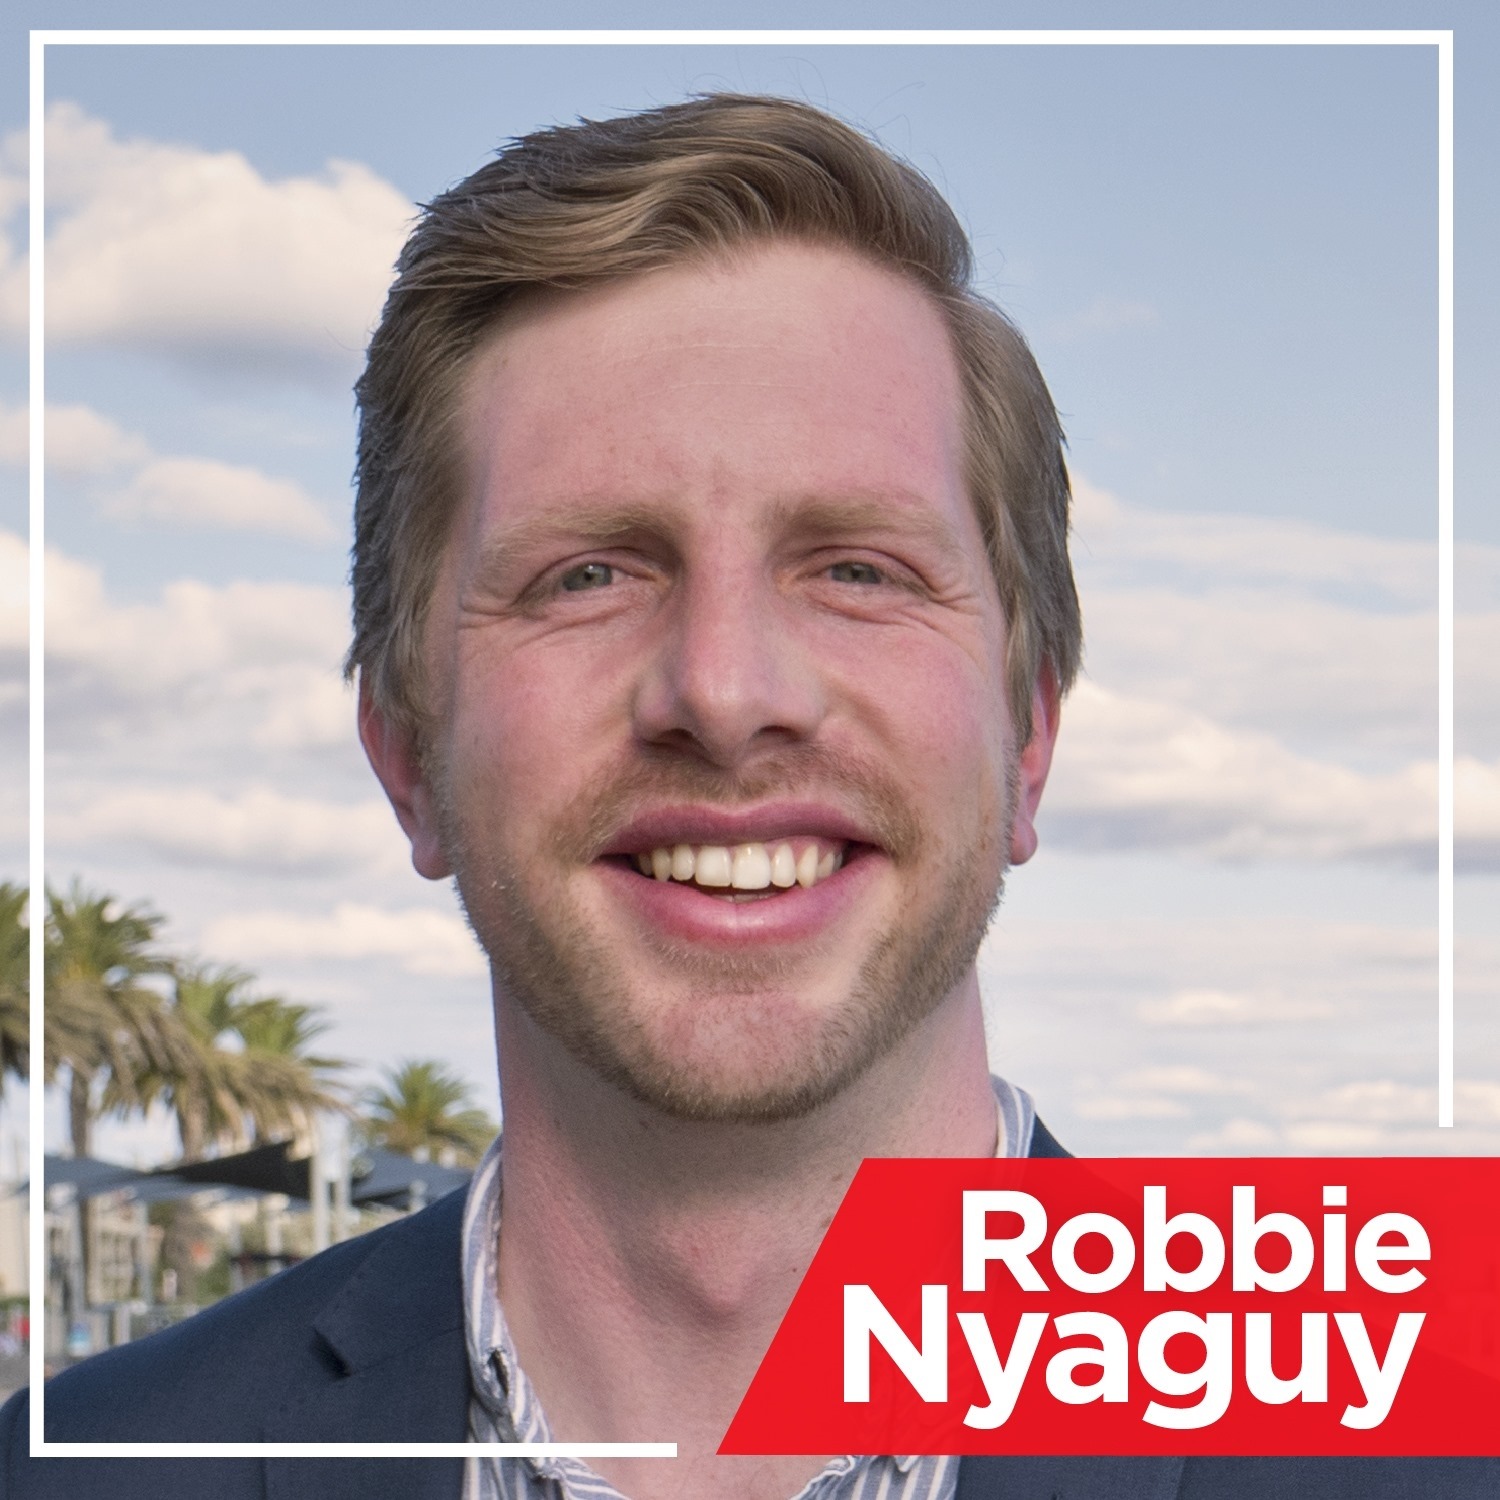 LGBTQI+ Candidates for Council: Robbie Nyaguy